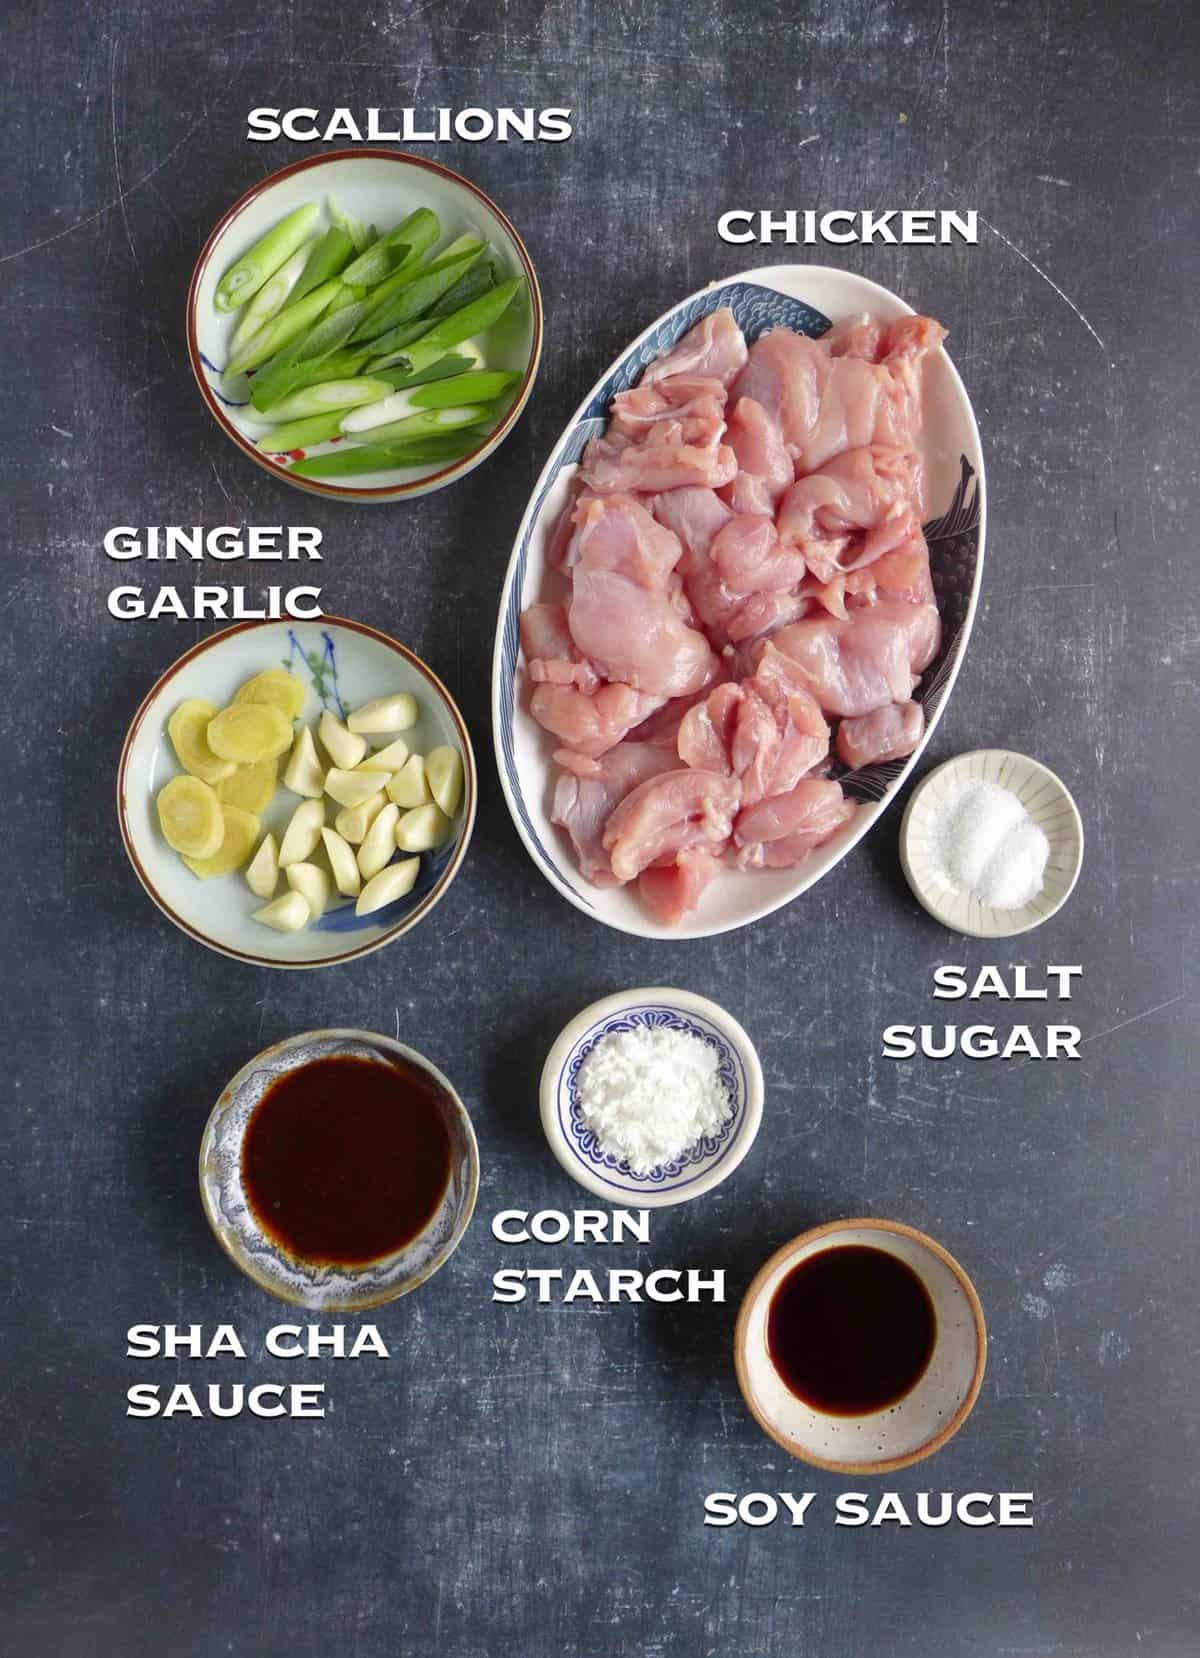 ingredients for making Sha Cha chicken.